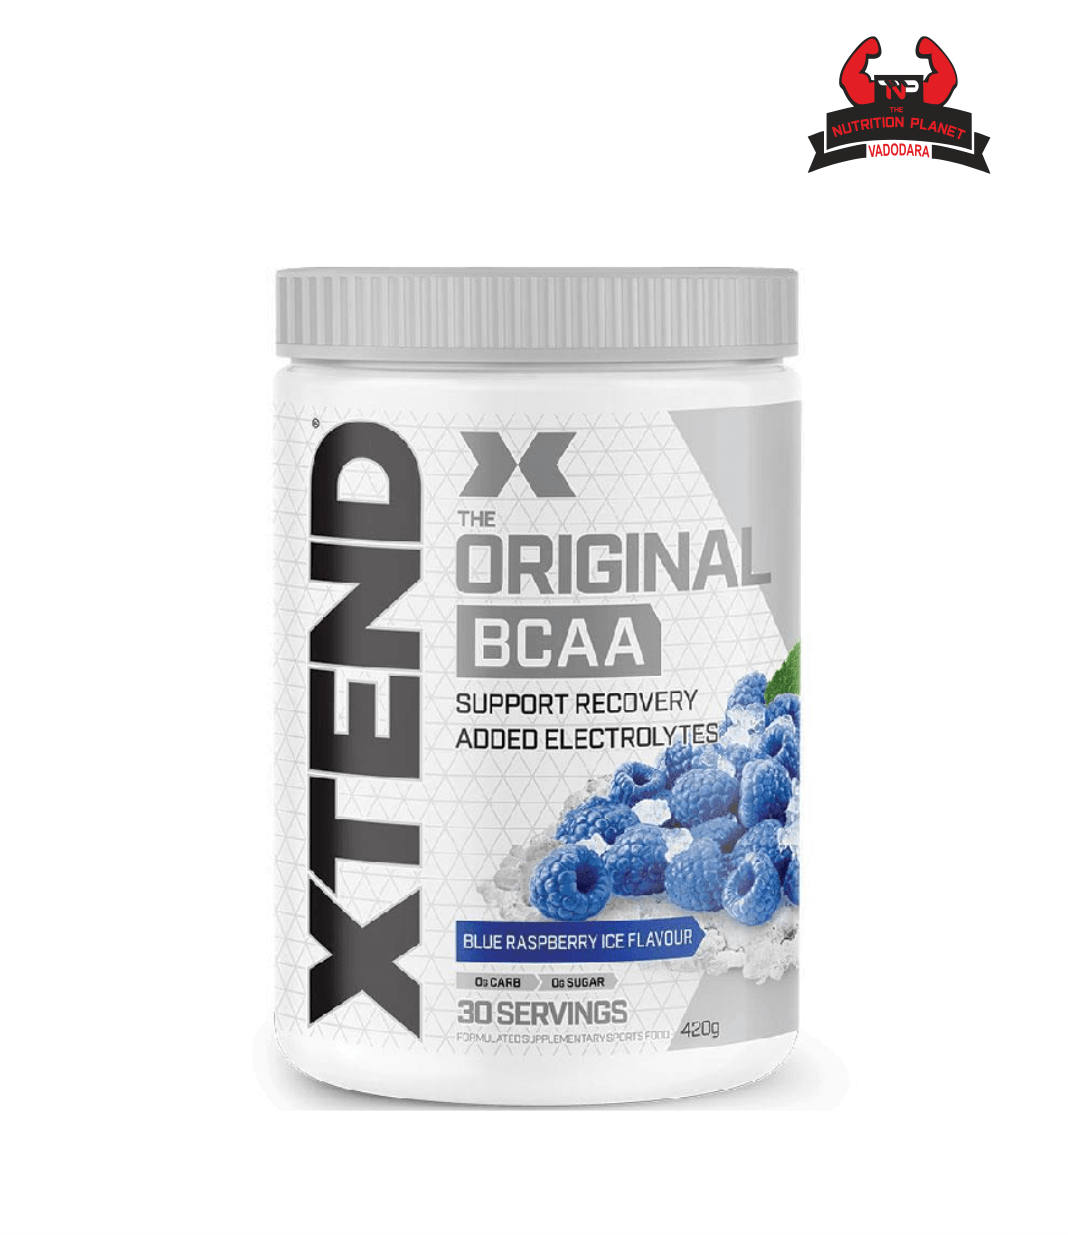 Scivation Xtend Original BCAA Muscle Recovery Electrolytes, 30 Servings